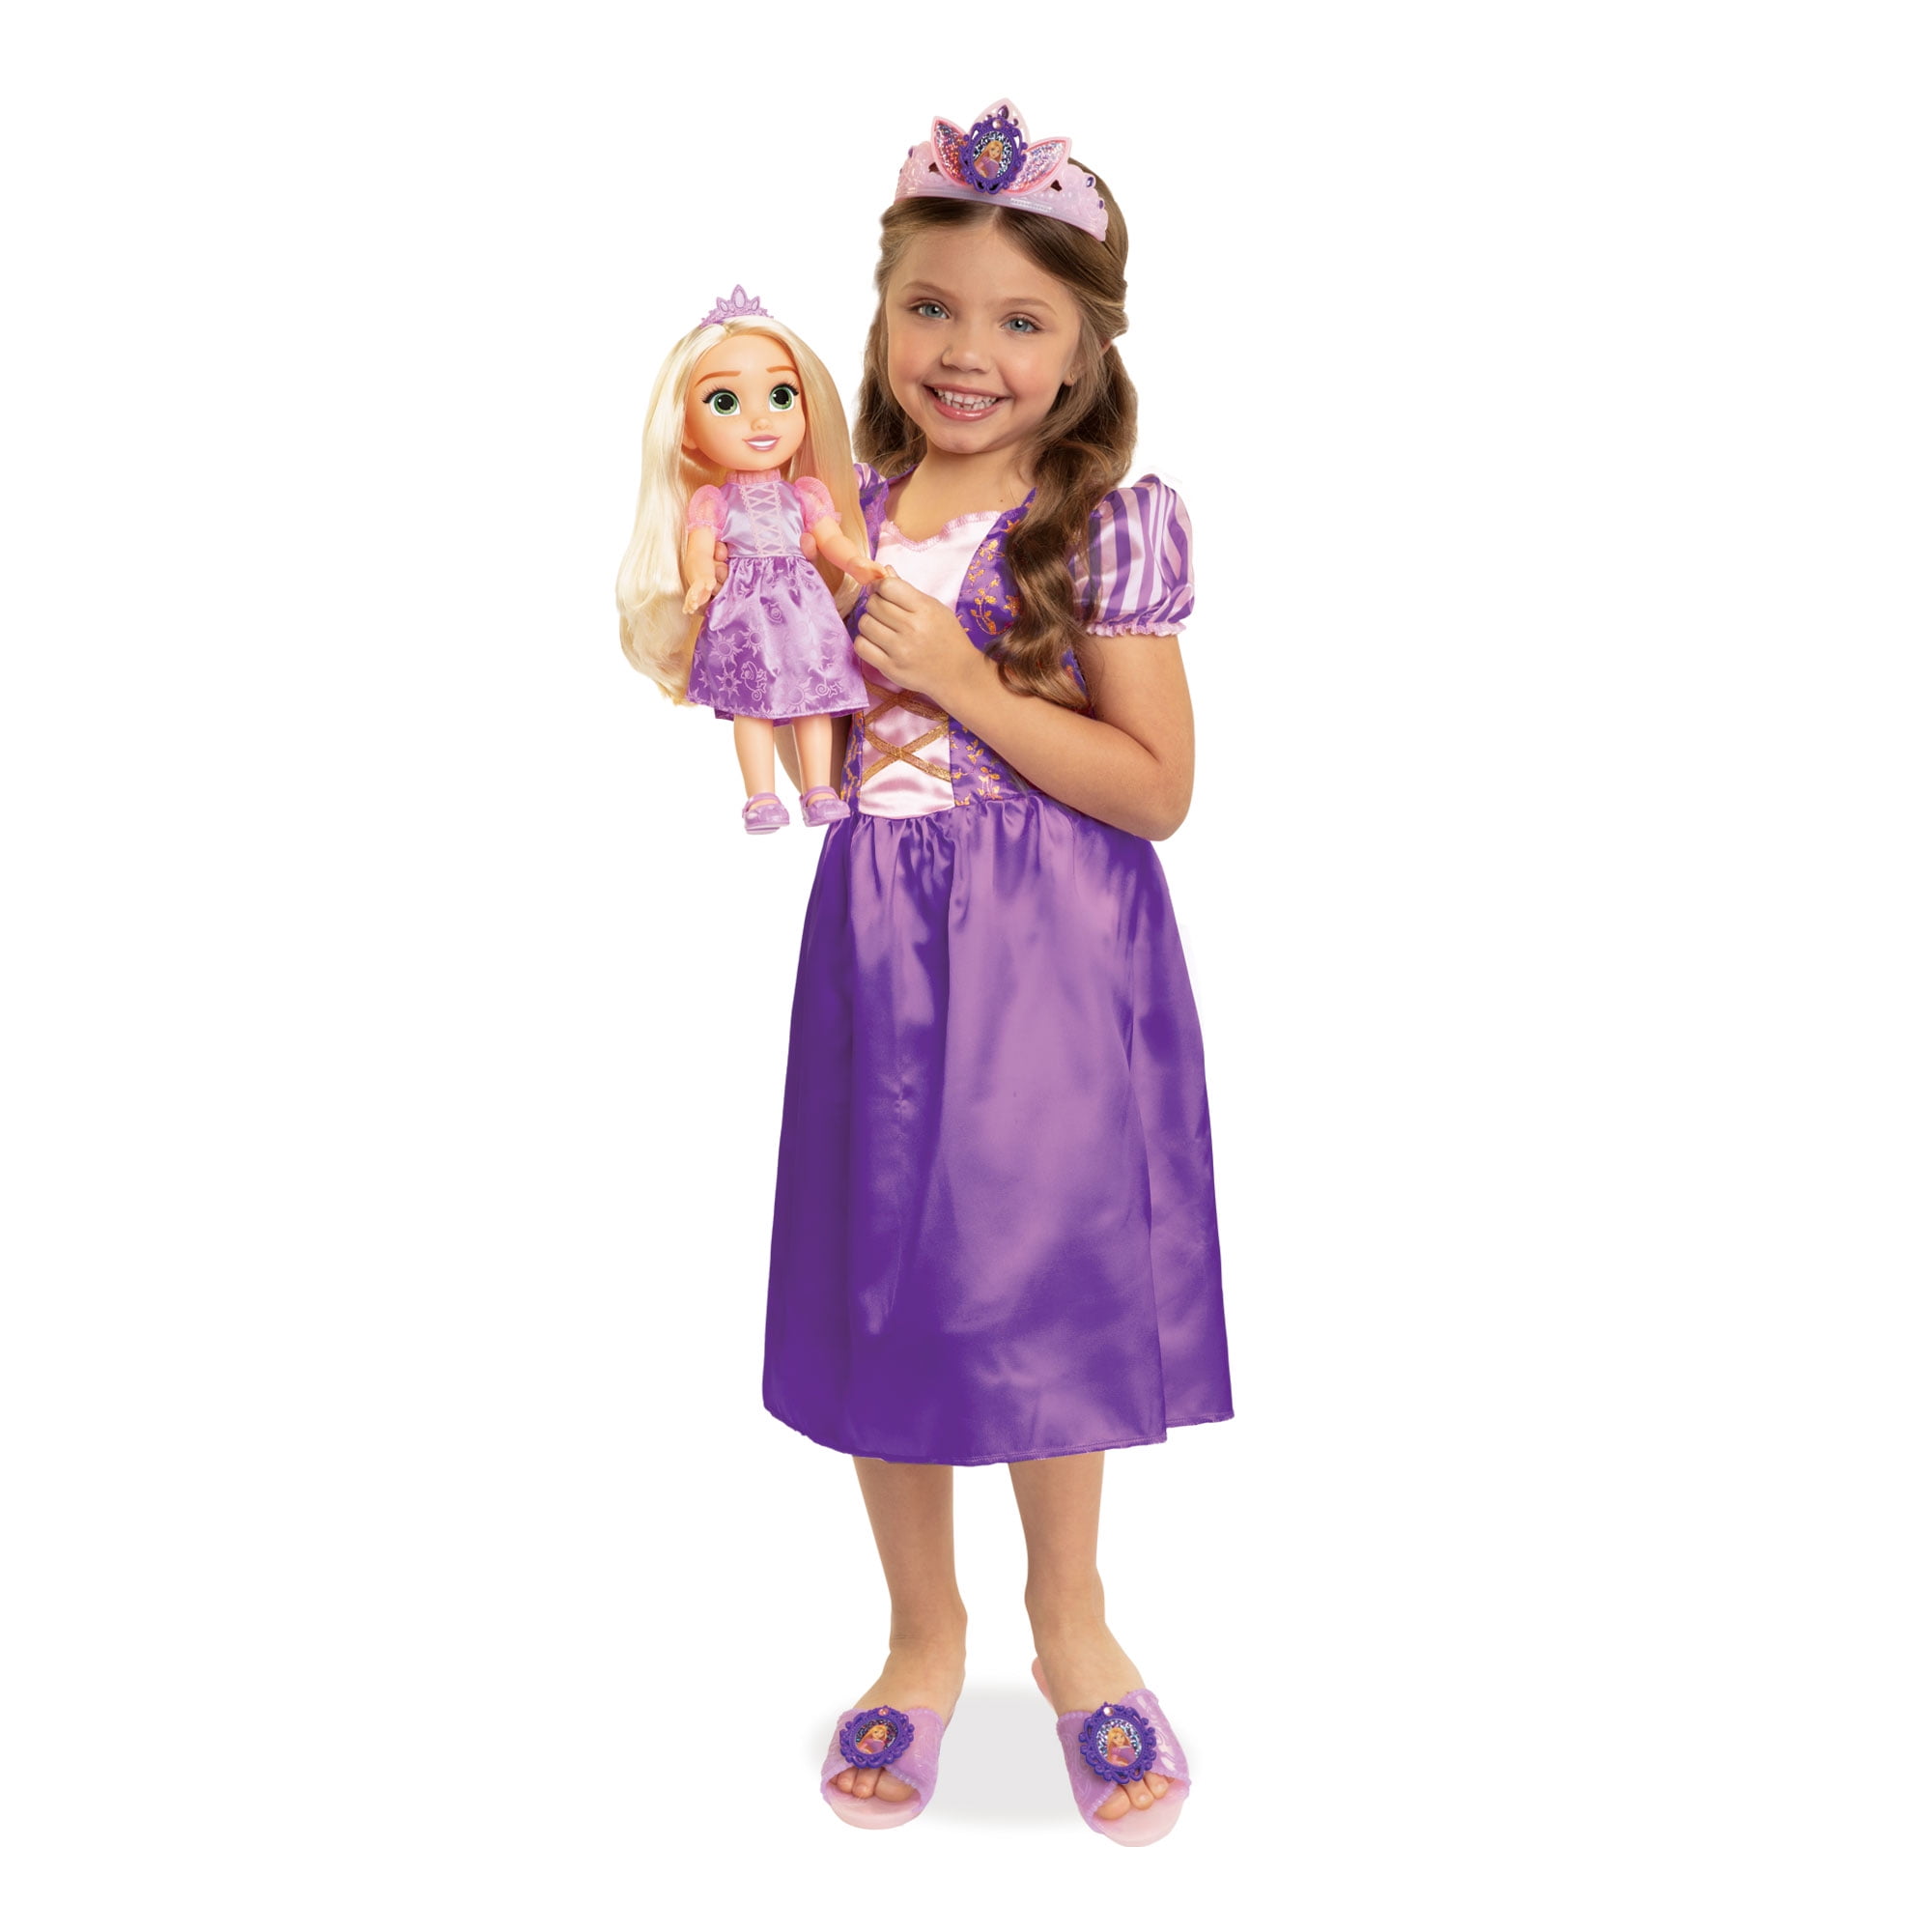 Disney Princess Rapunzel Toddler Doll with Child Size Dress and Accessories